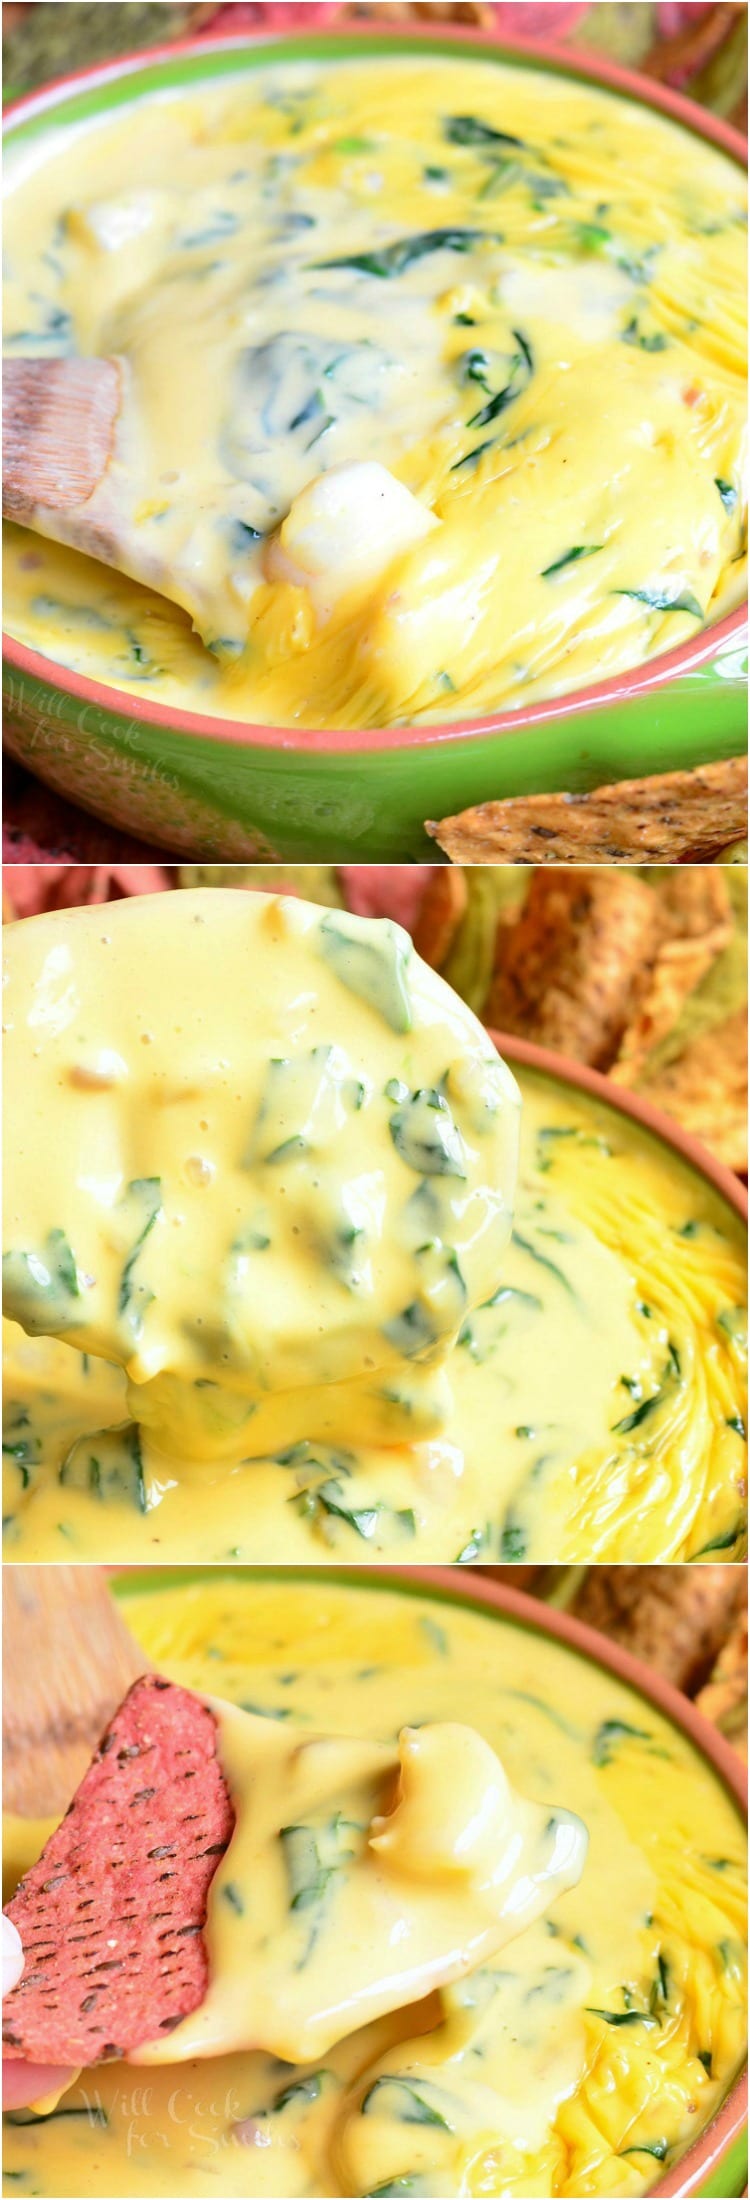 Shrimp and Spinach Queso Dip collage 